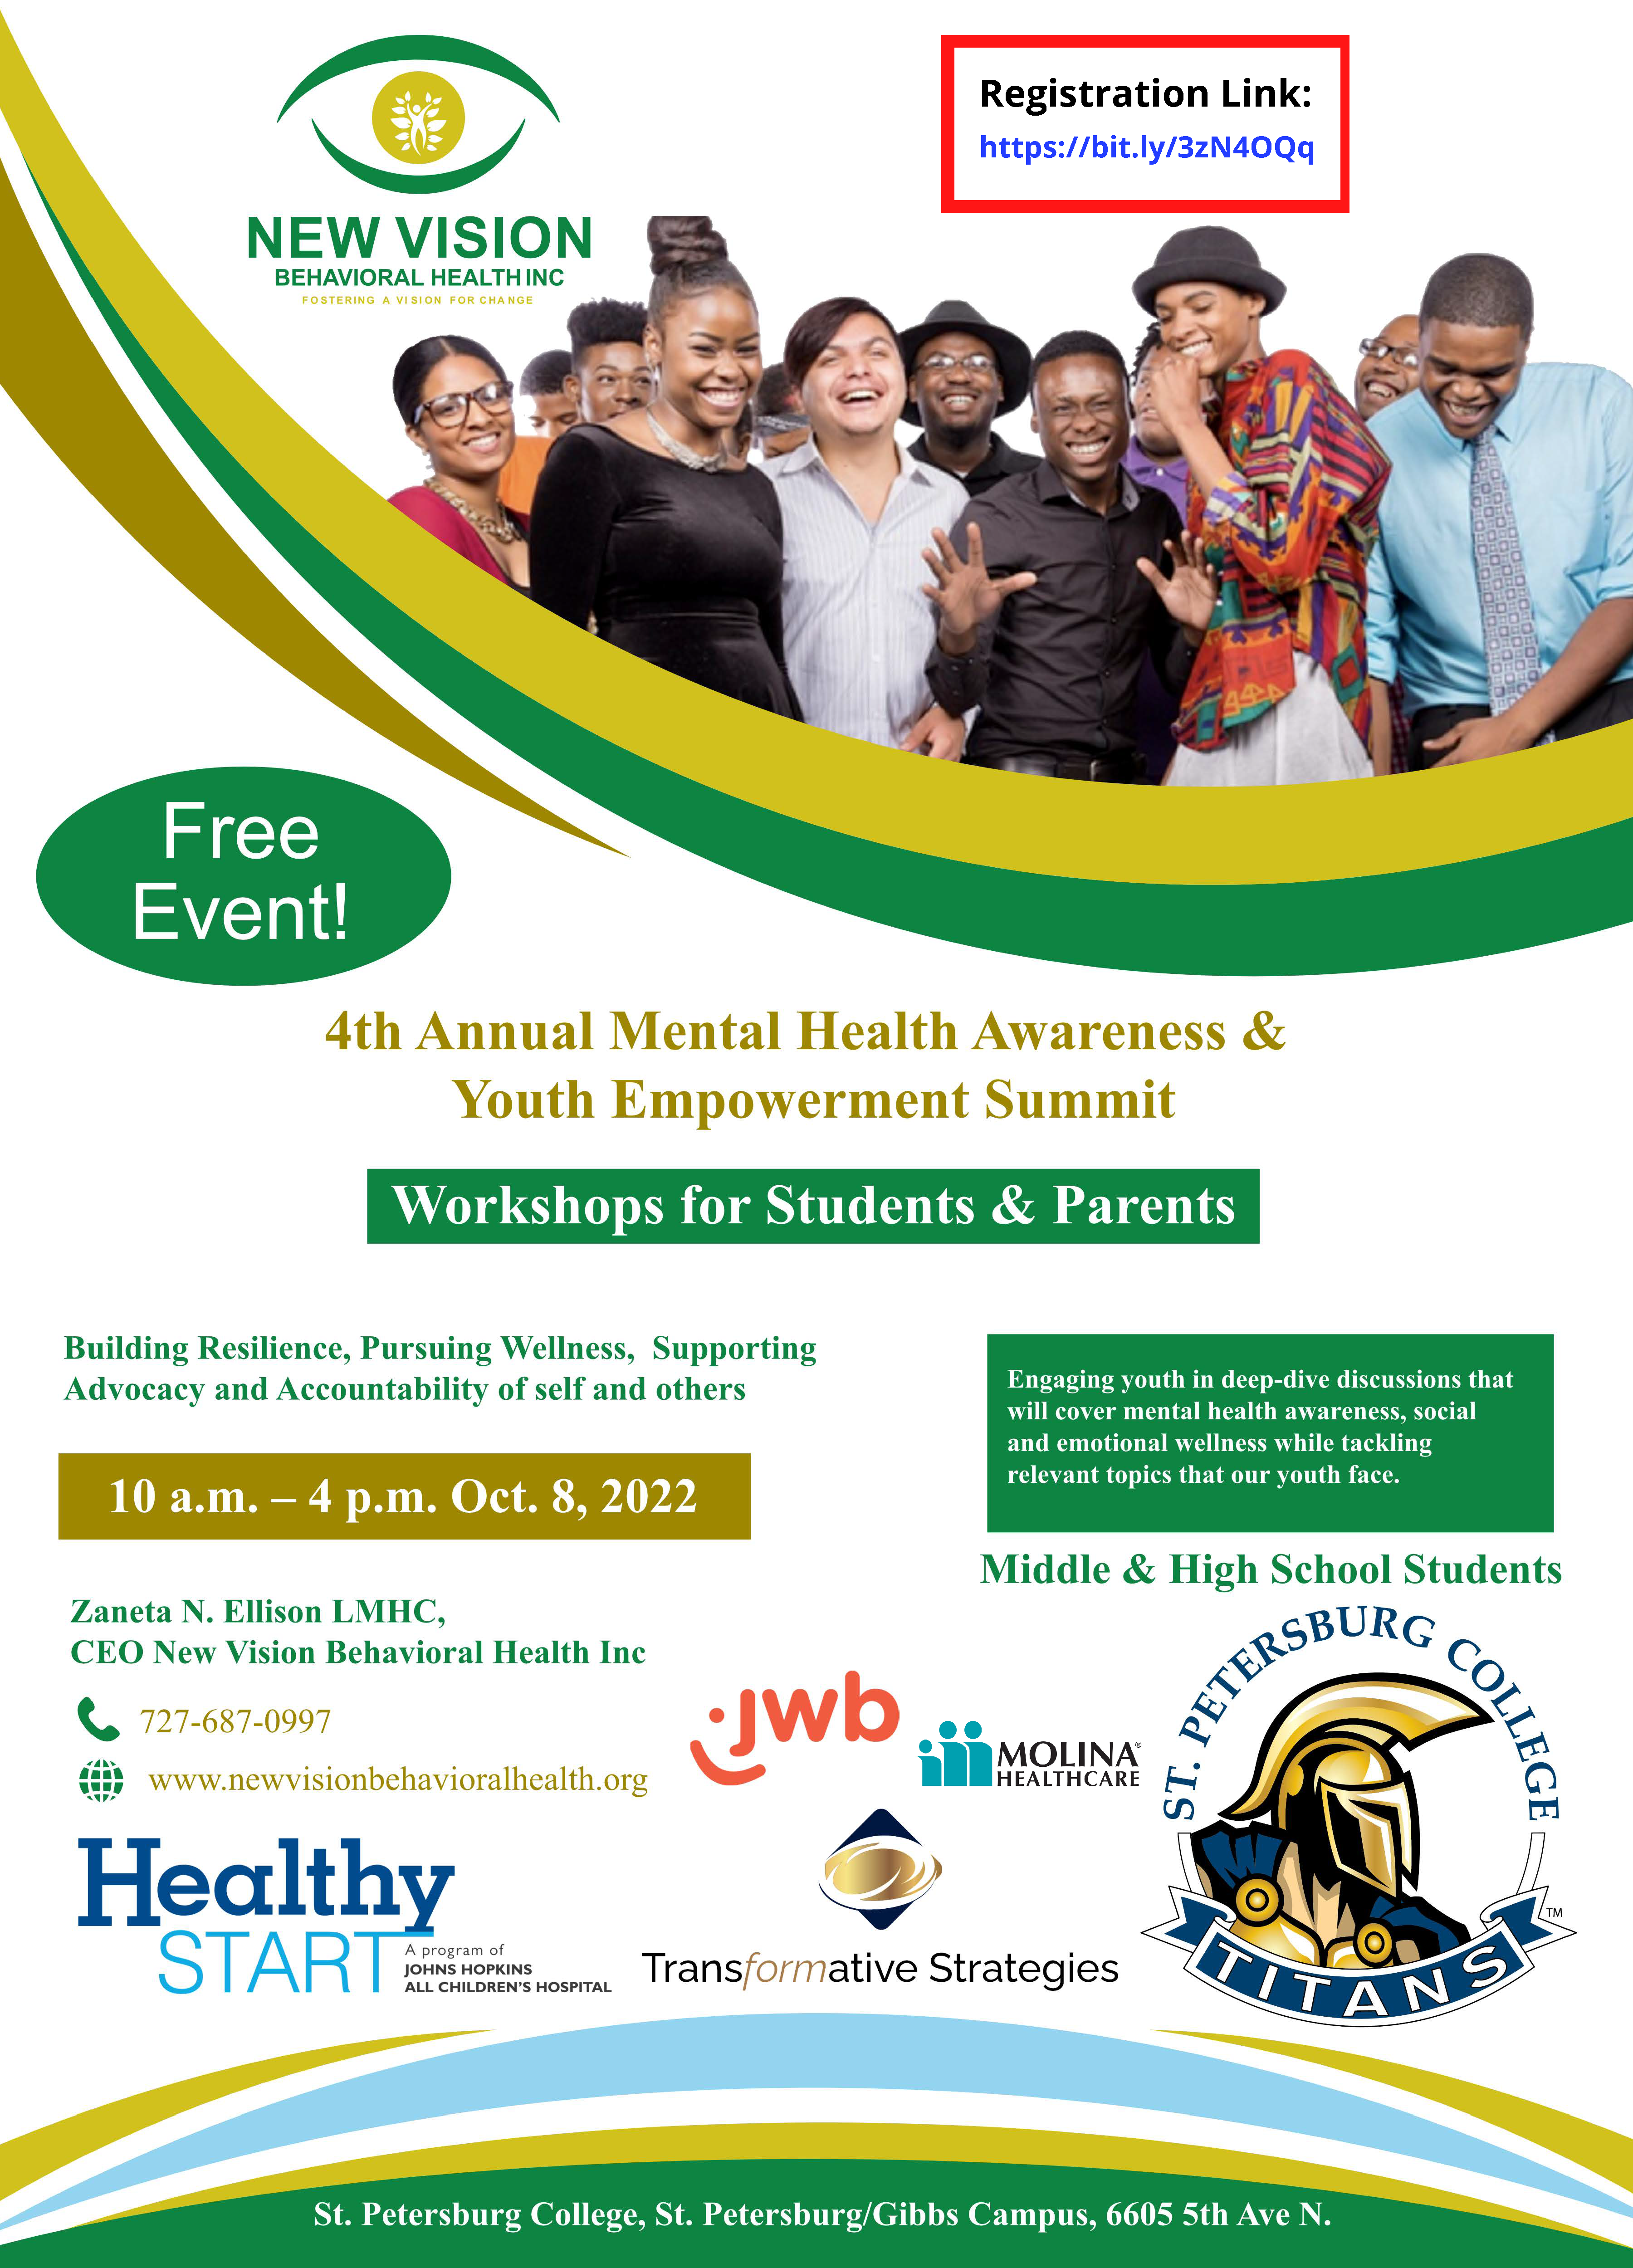 New Vision Behavioral Health Inc. is excited to announce its 4th Annual Mental Health Awareness & Empowerment Youth Summit. The event date is Saturday, October 8th, 10:00 a.m. – 4:00 p.m.